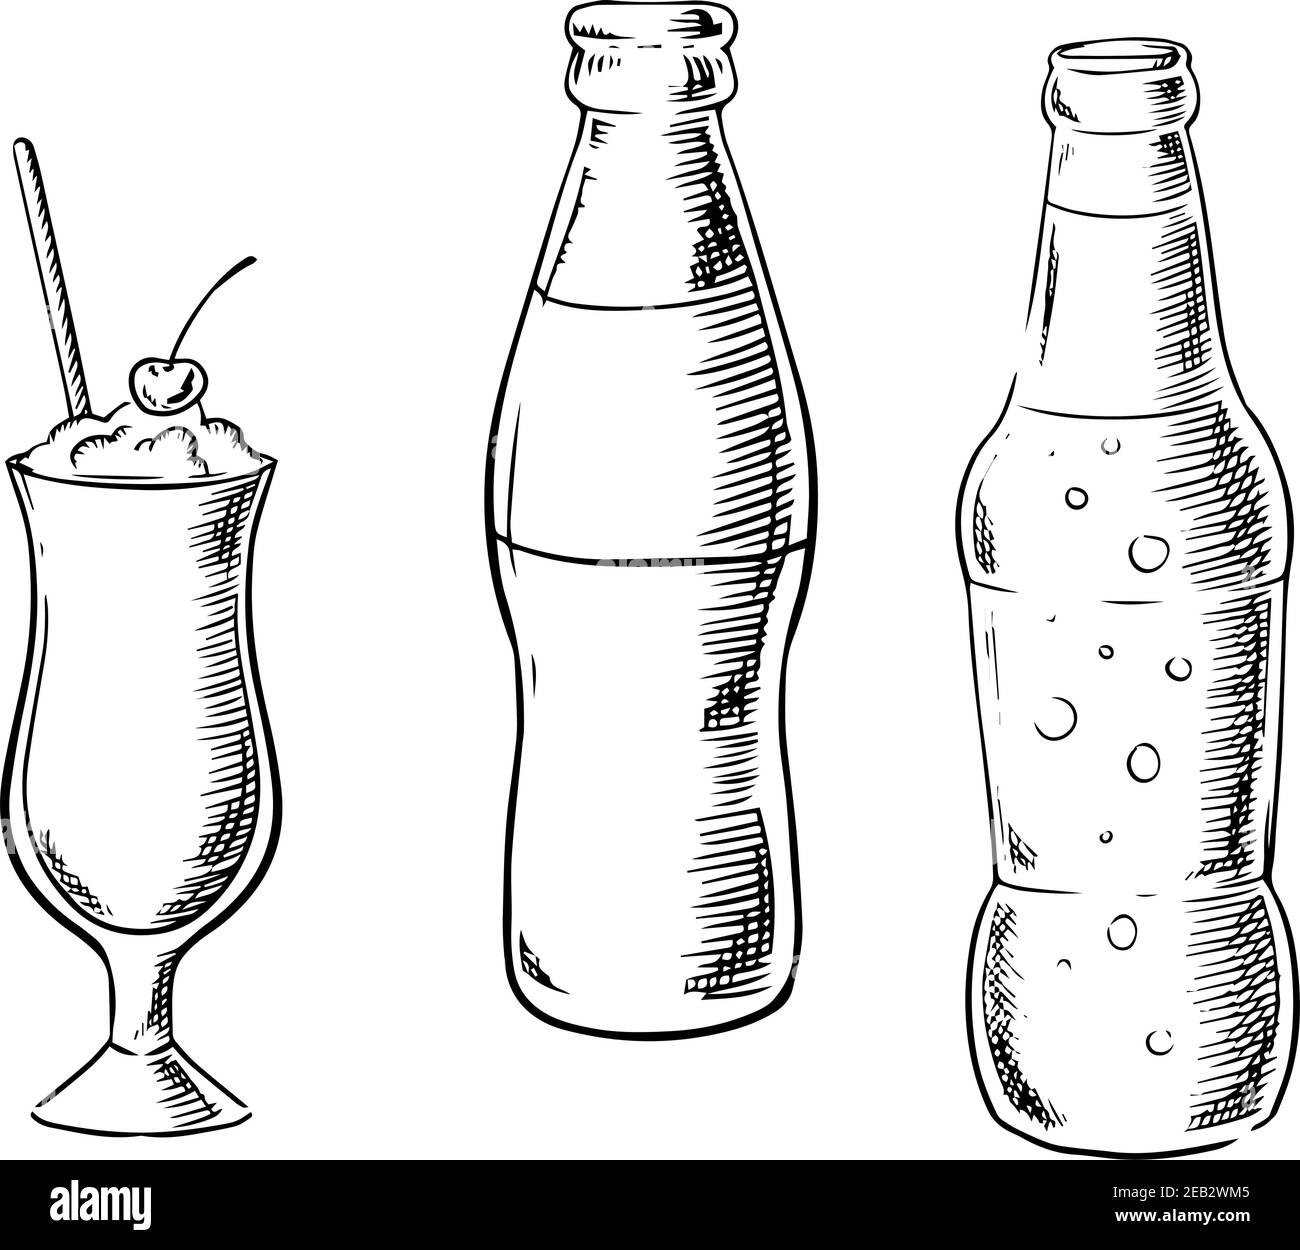 Beer and soda bottles with milk cocktail, served in tall glass with cherry fruit and drink straw. Sketch image Stock Vector